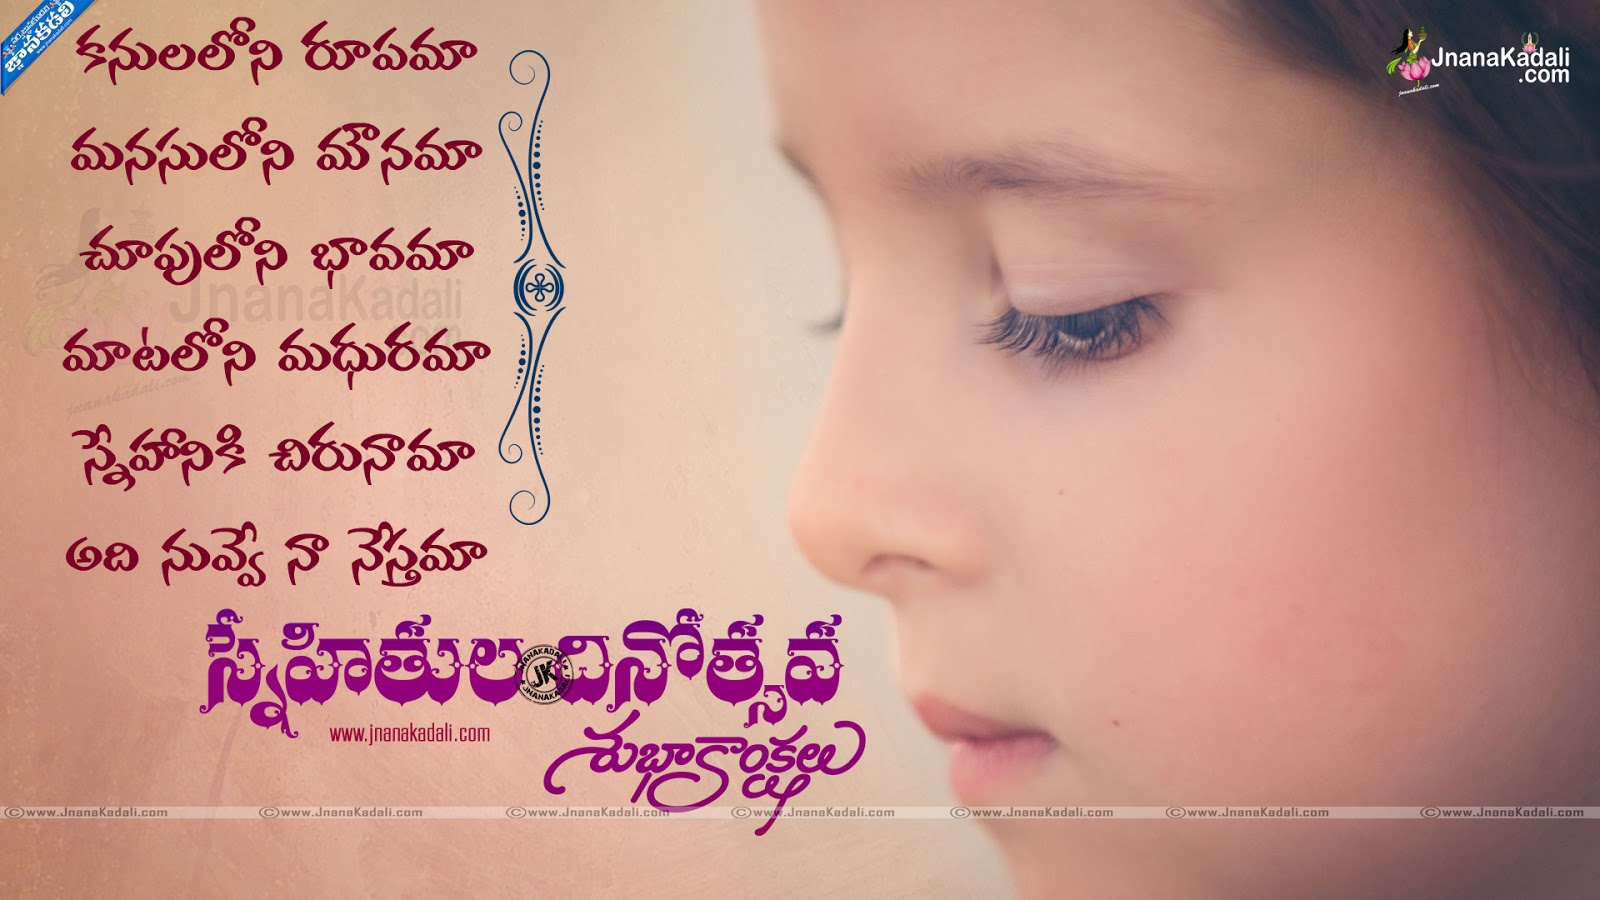 Friendship Day Wishes With Beautiful HD Wallpaper In Telugu